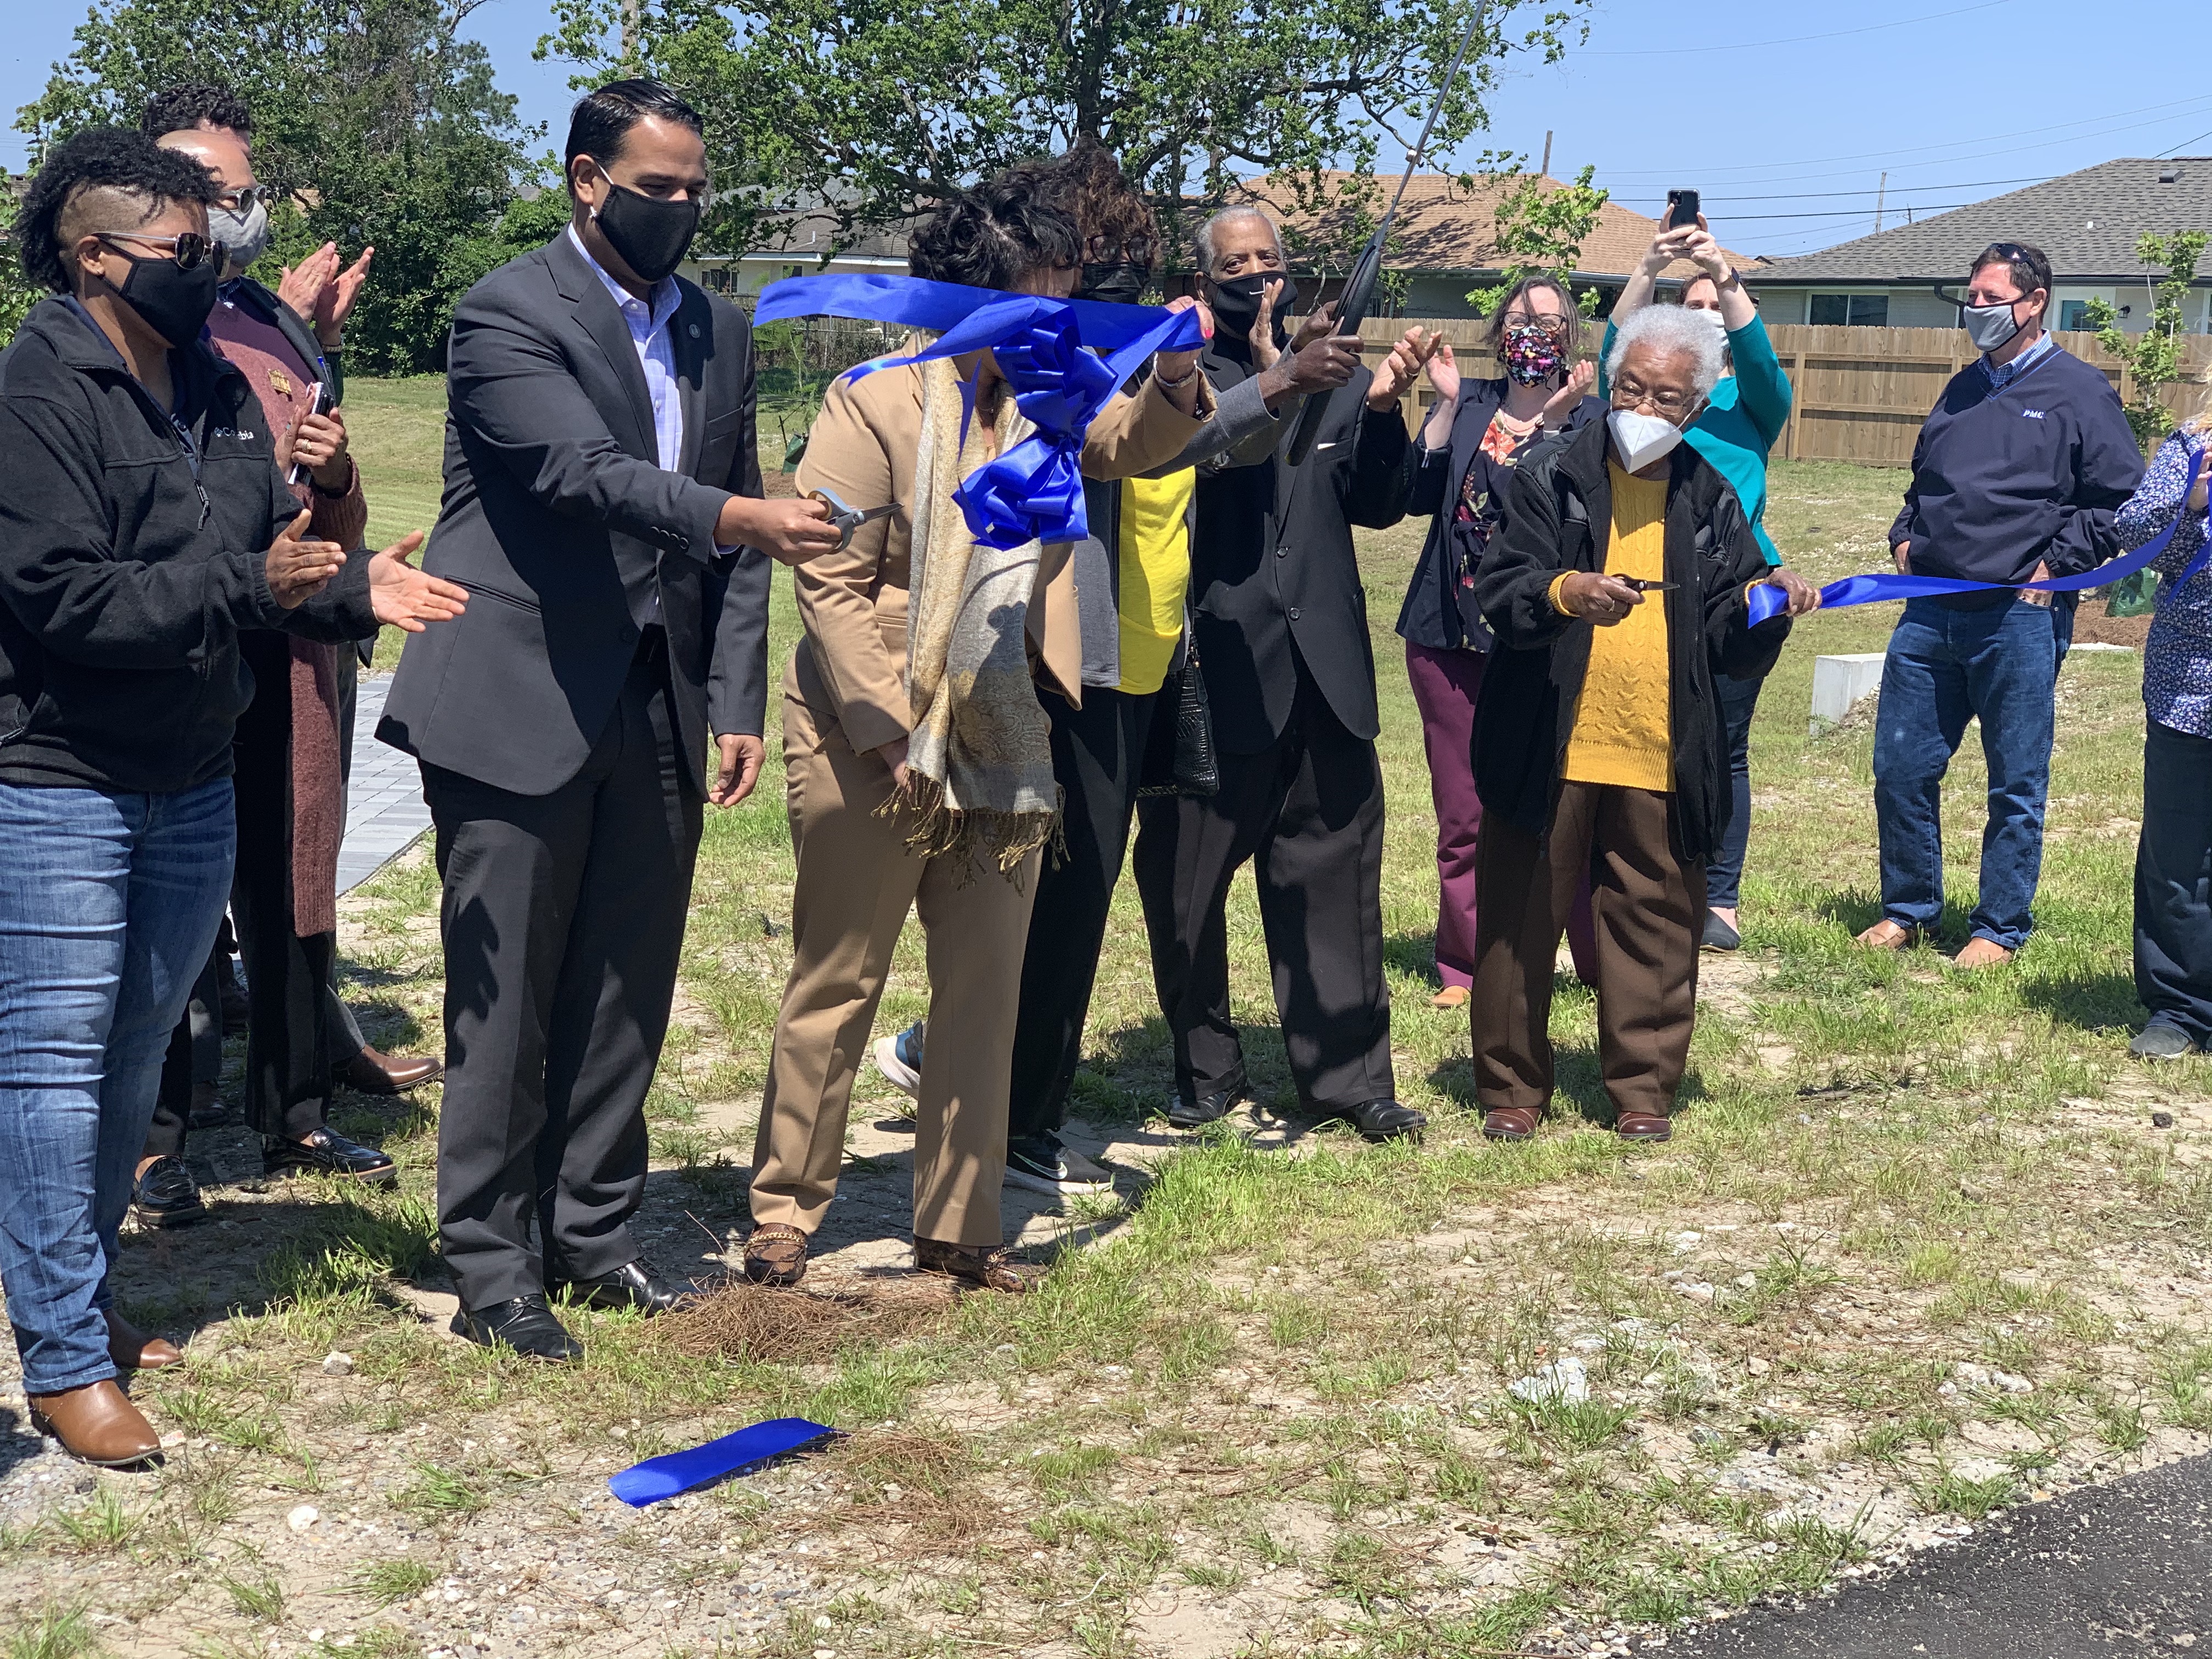 MAYOR CANTRELL CELEBRATES COMPLETION OF $15.5M PONTILLY NEIGHBORHOOD STORMWATER NETWORK